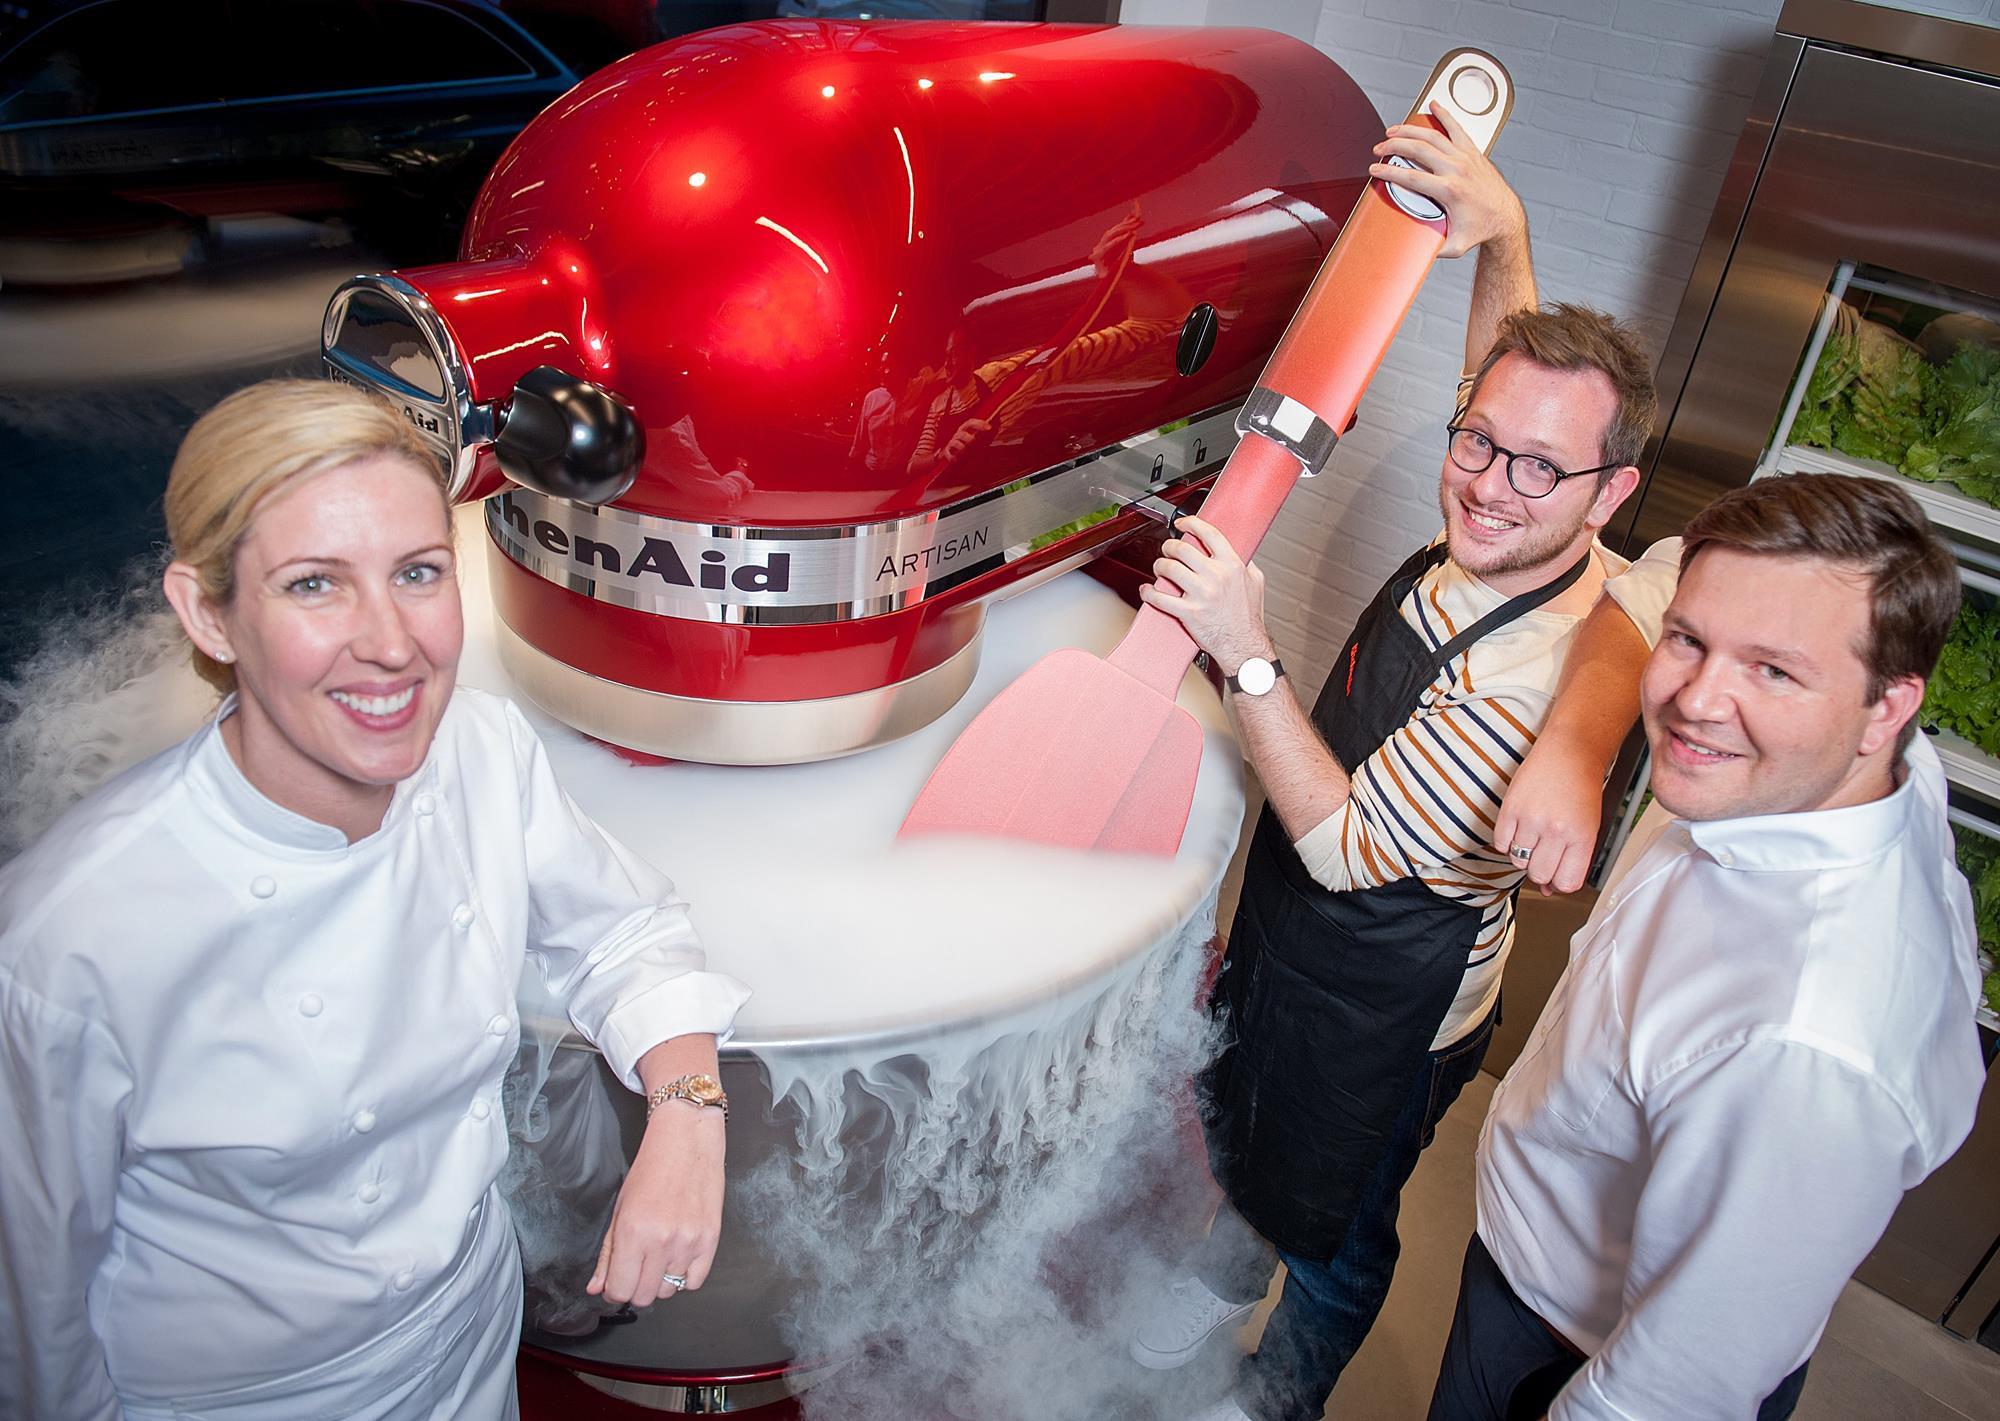 Store gallery: KitchenAid opens debut 'experience store', Gallery